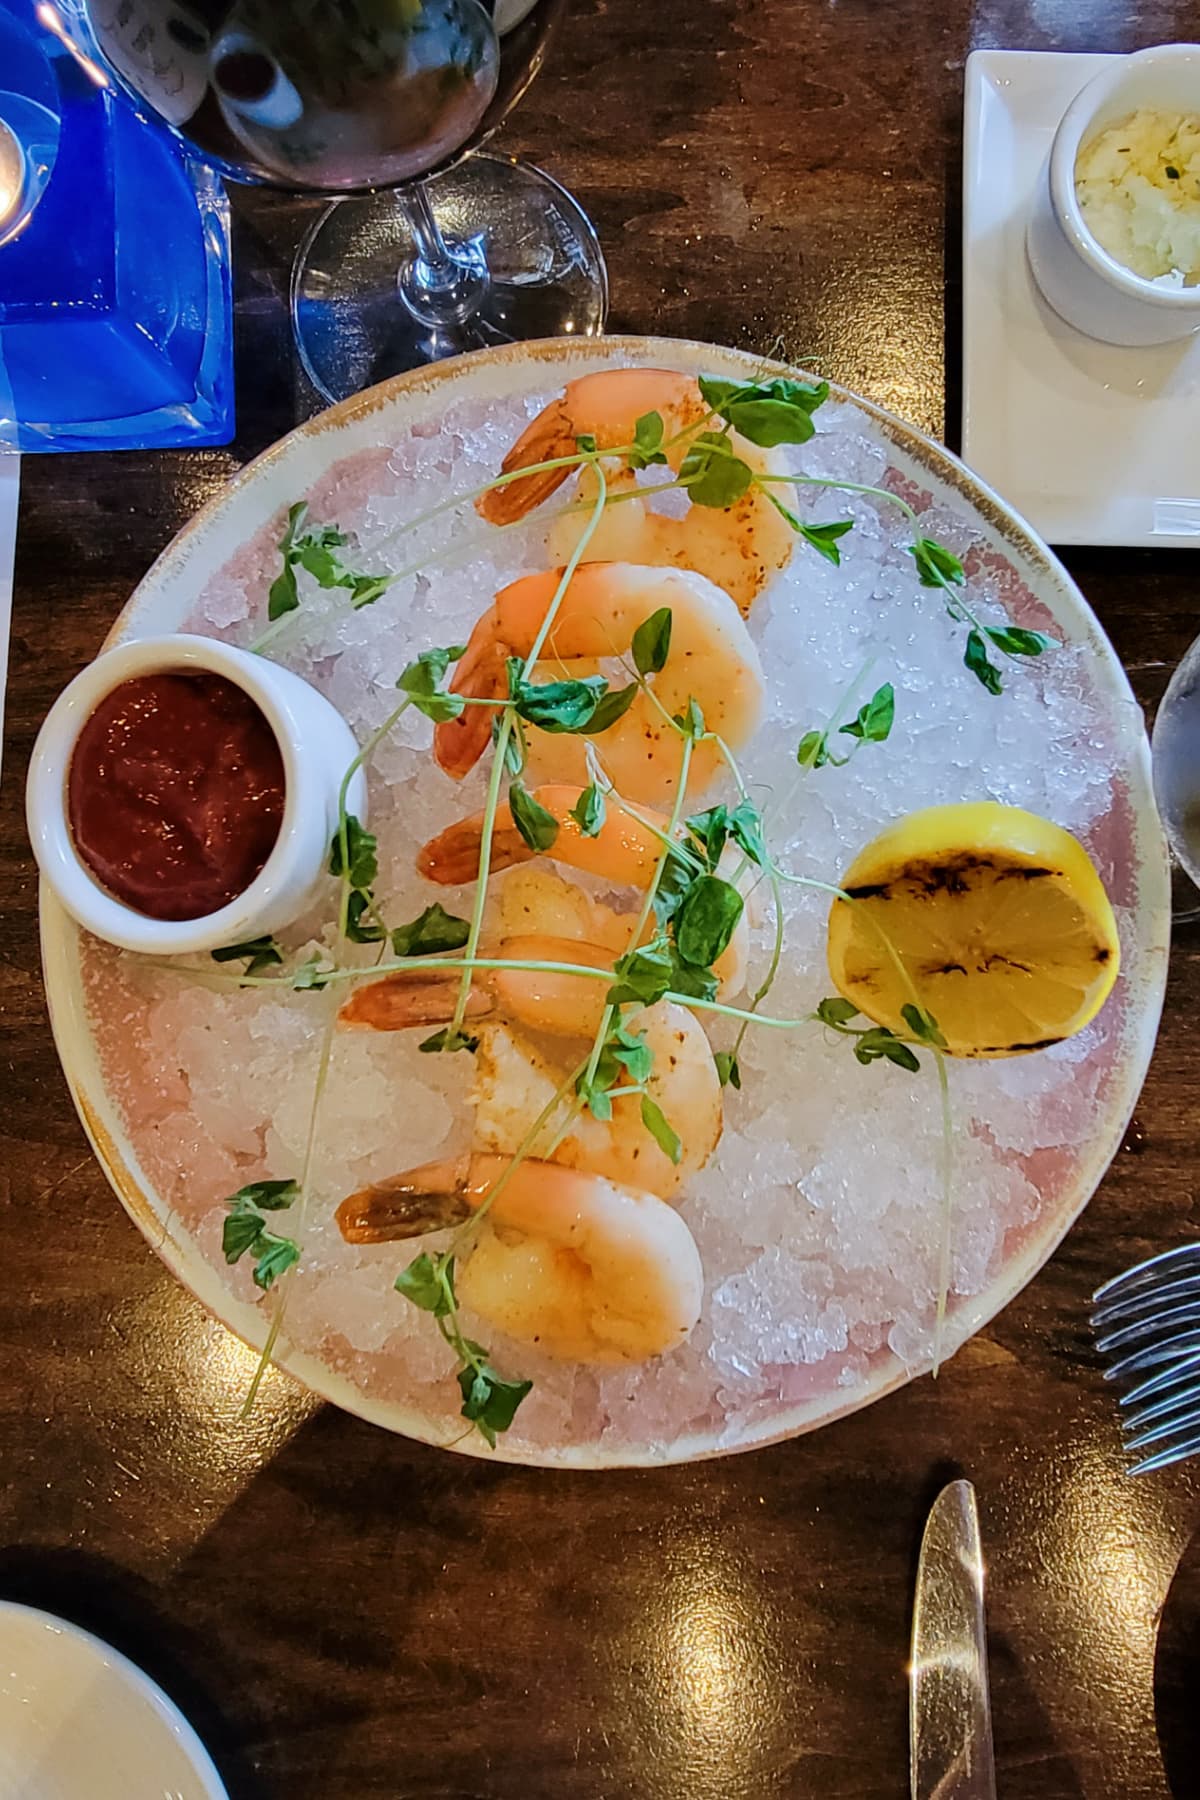 Shrimp cocktail over ice